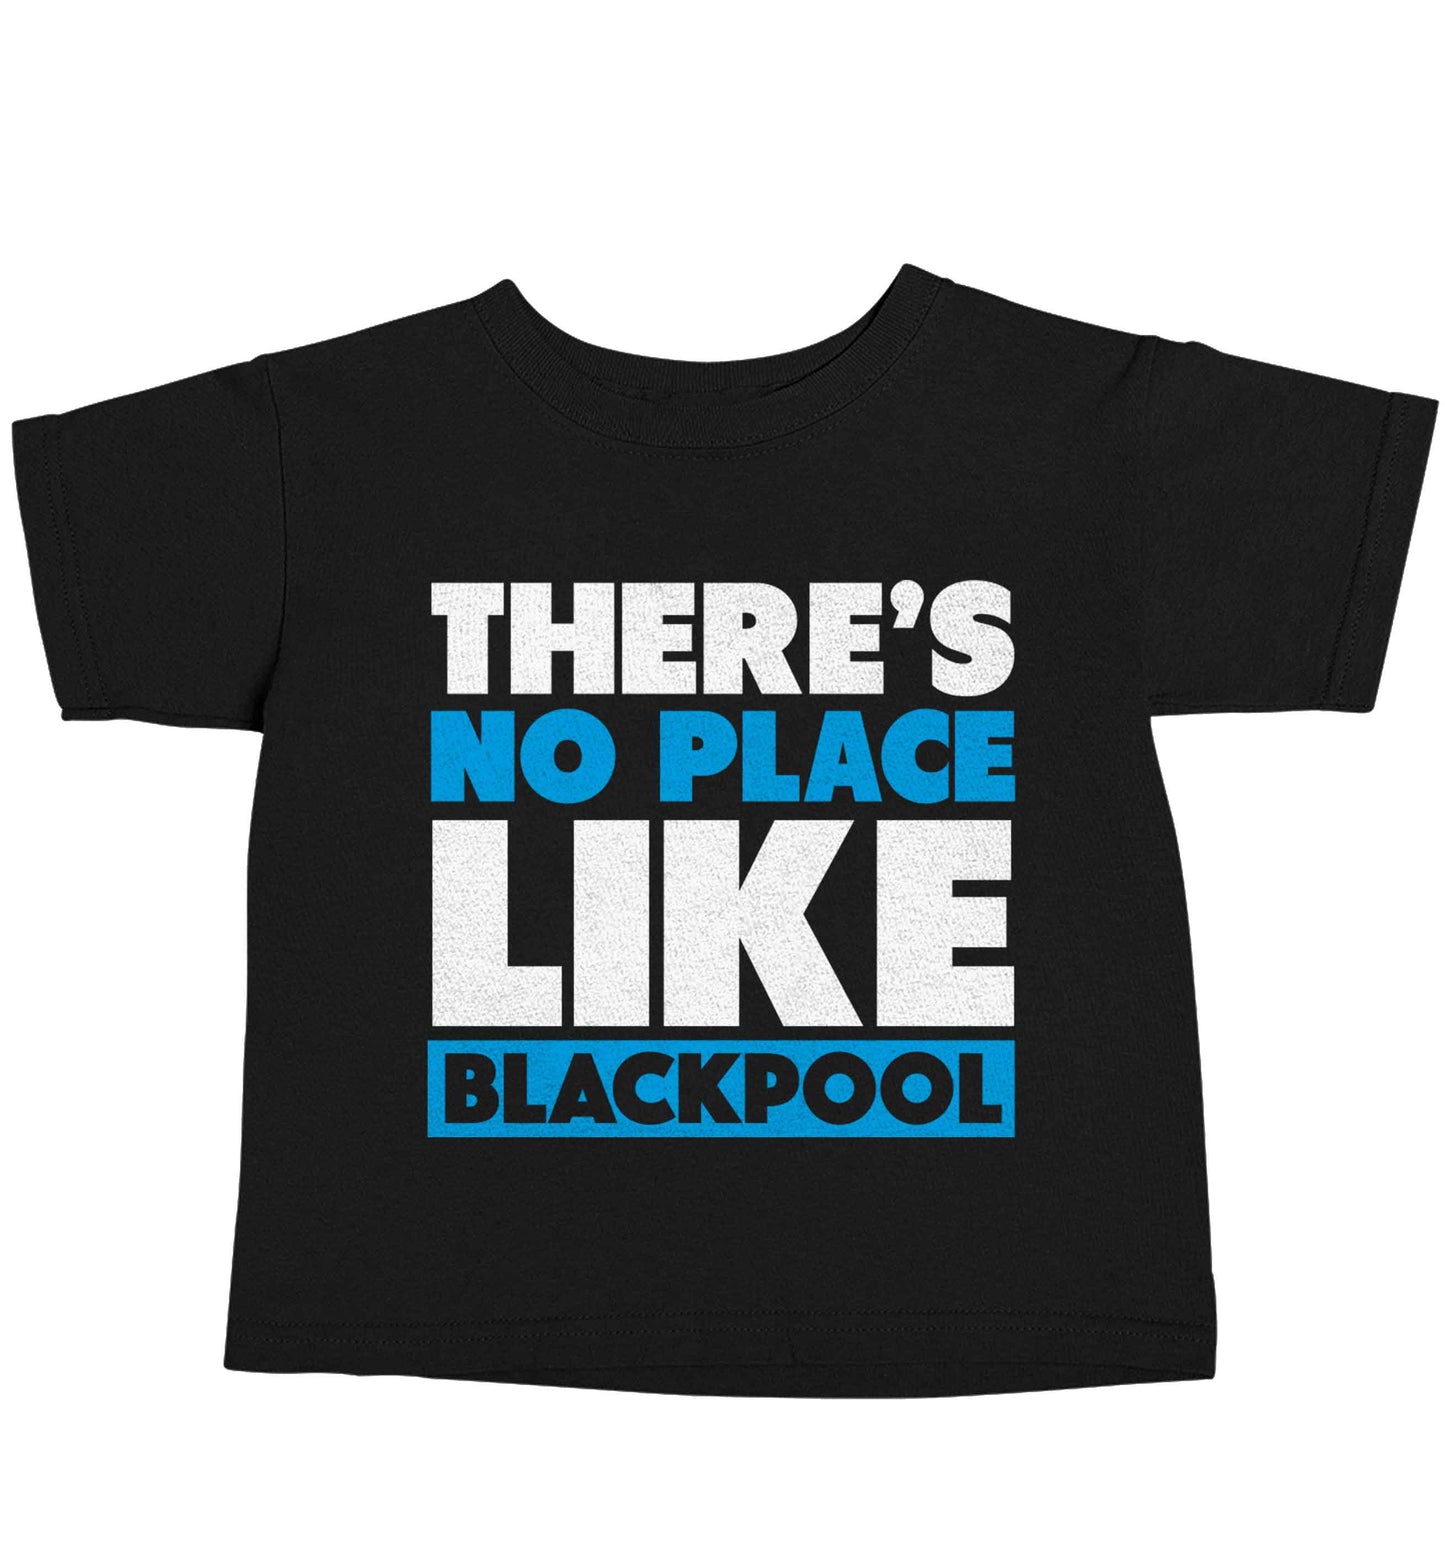 There's no place like Blackpool Black baby toddler Tshirt 2 years